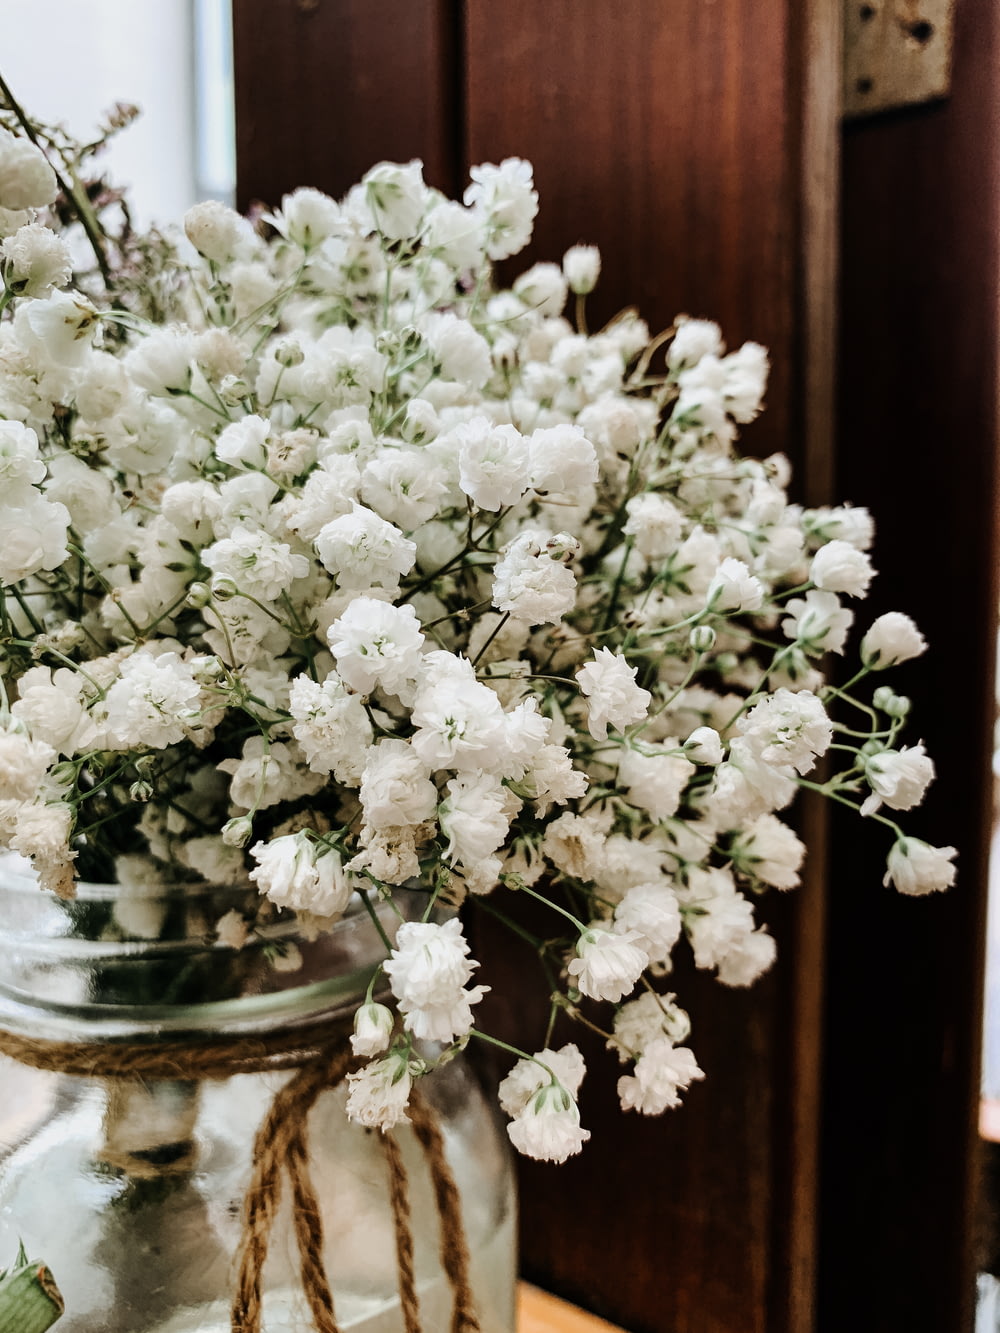 white flowers on clear glass vase